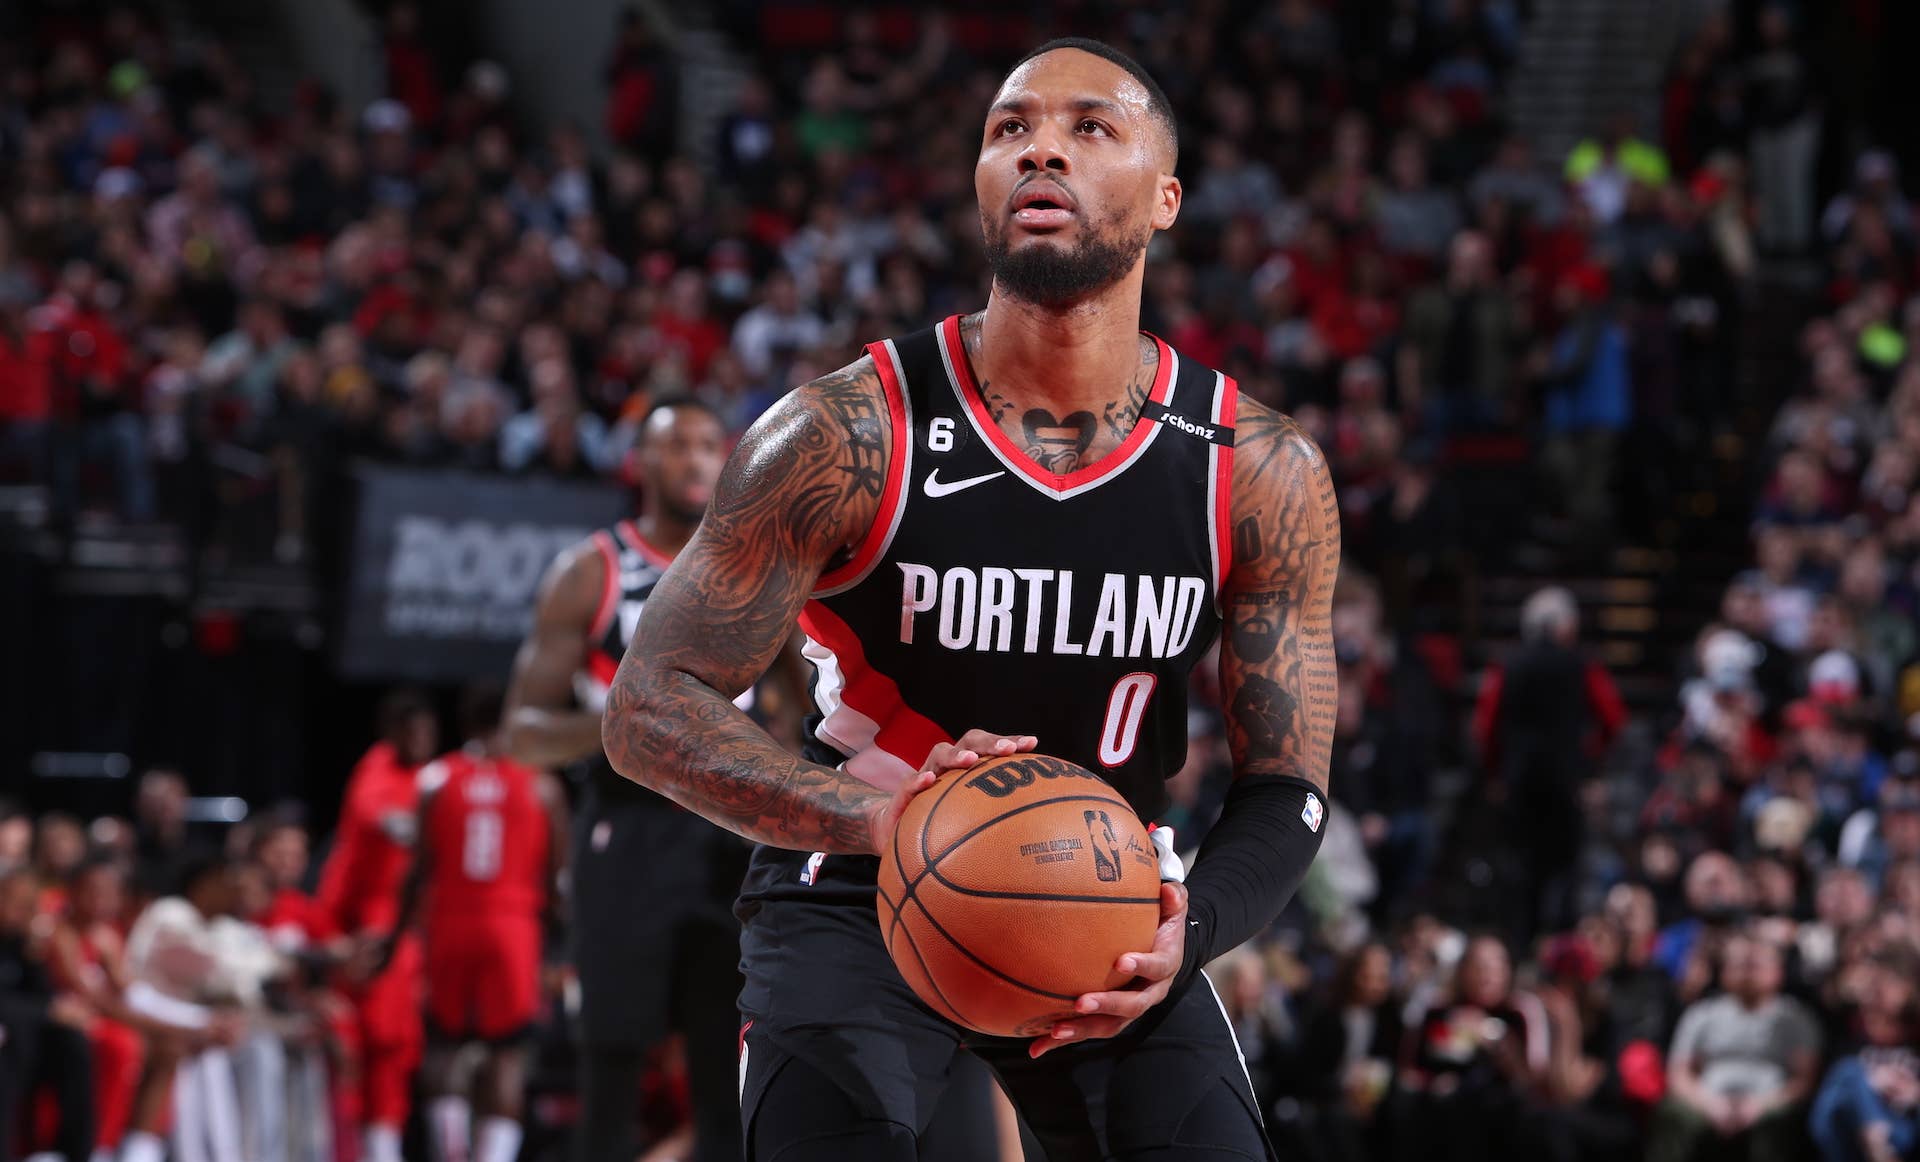 Damian Lillard during the Portland Trail Blazer's game against the Houston Rockets in February 2023